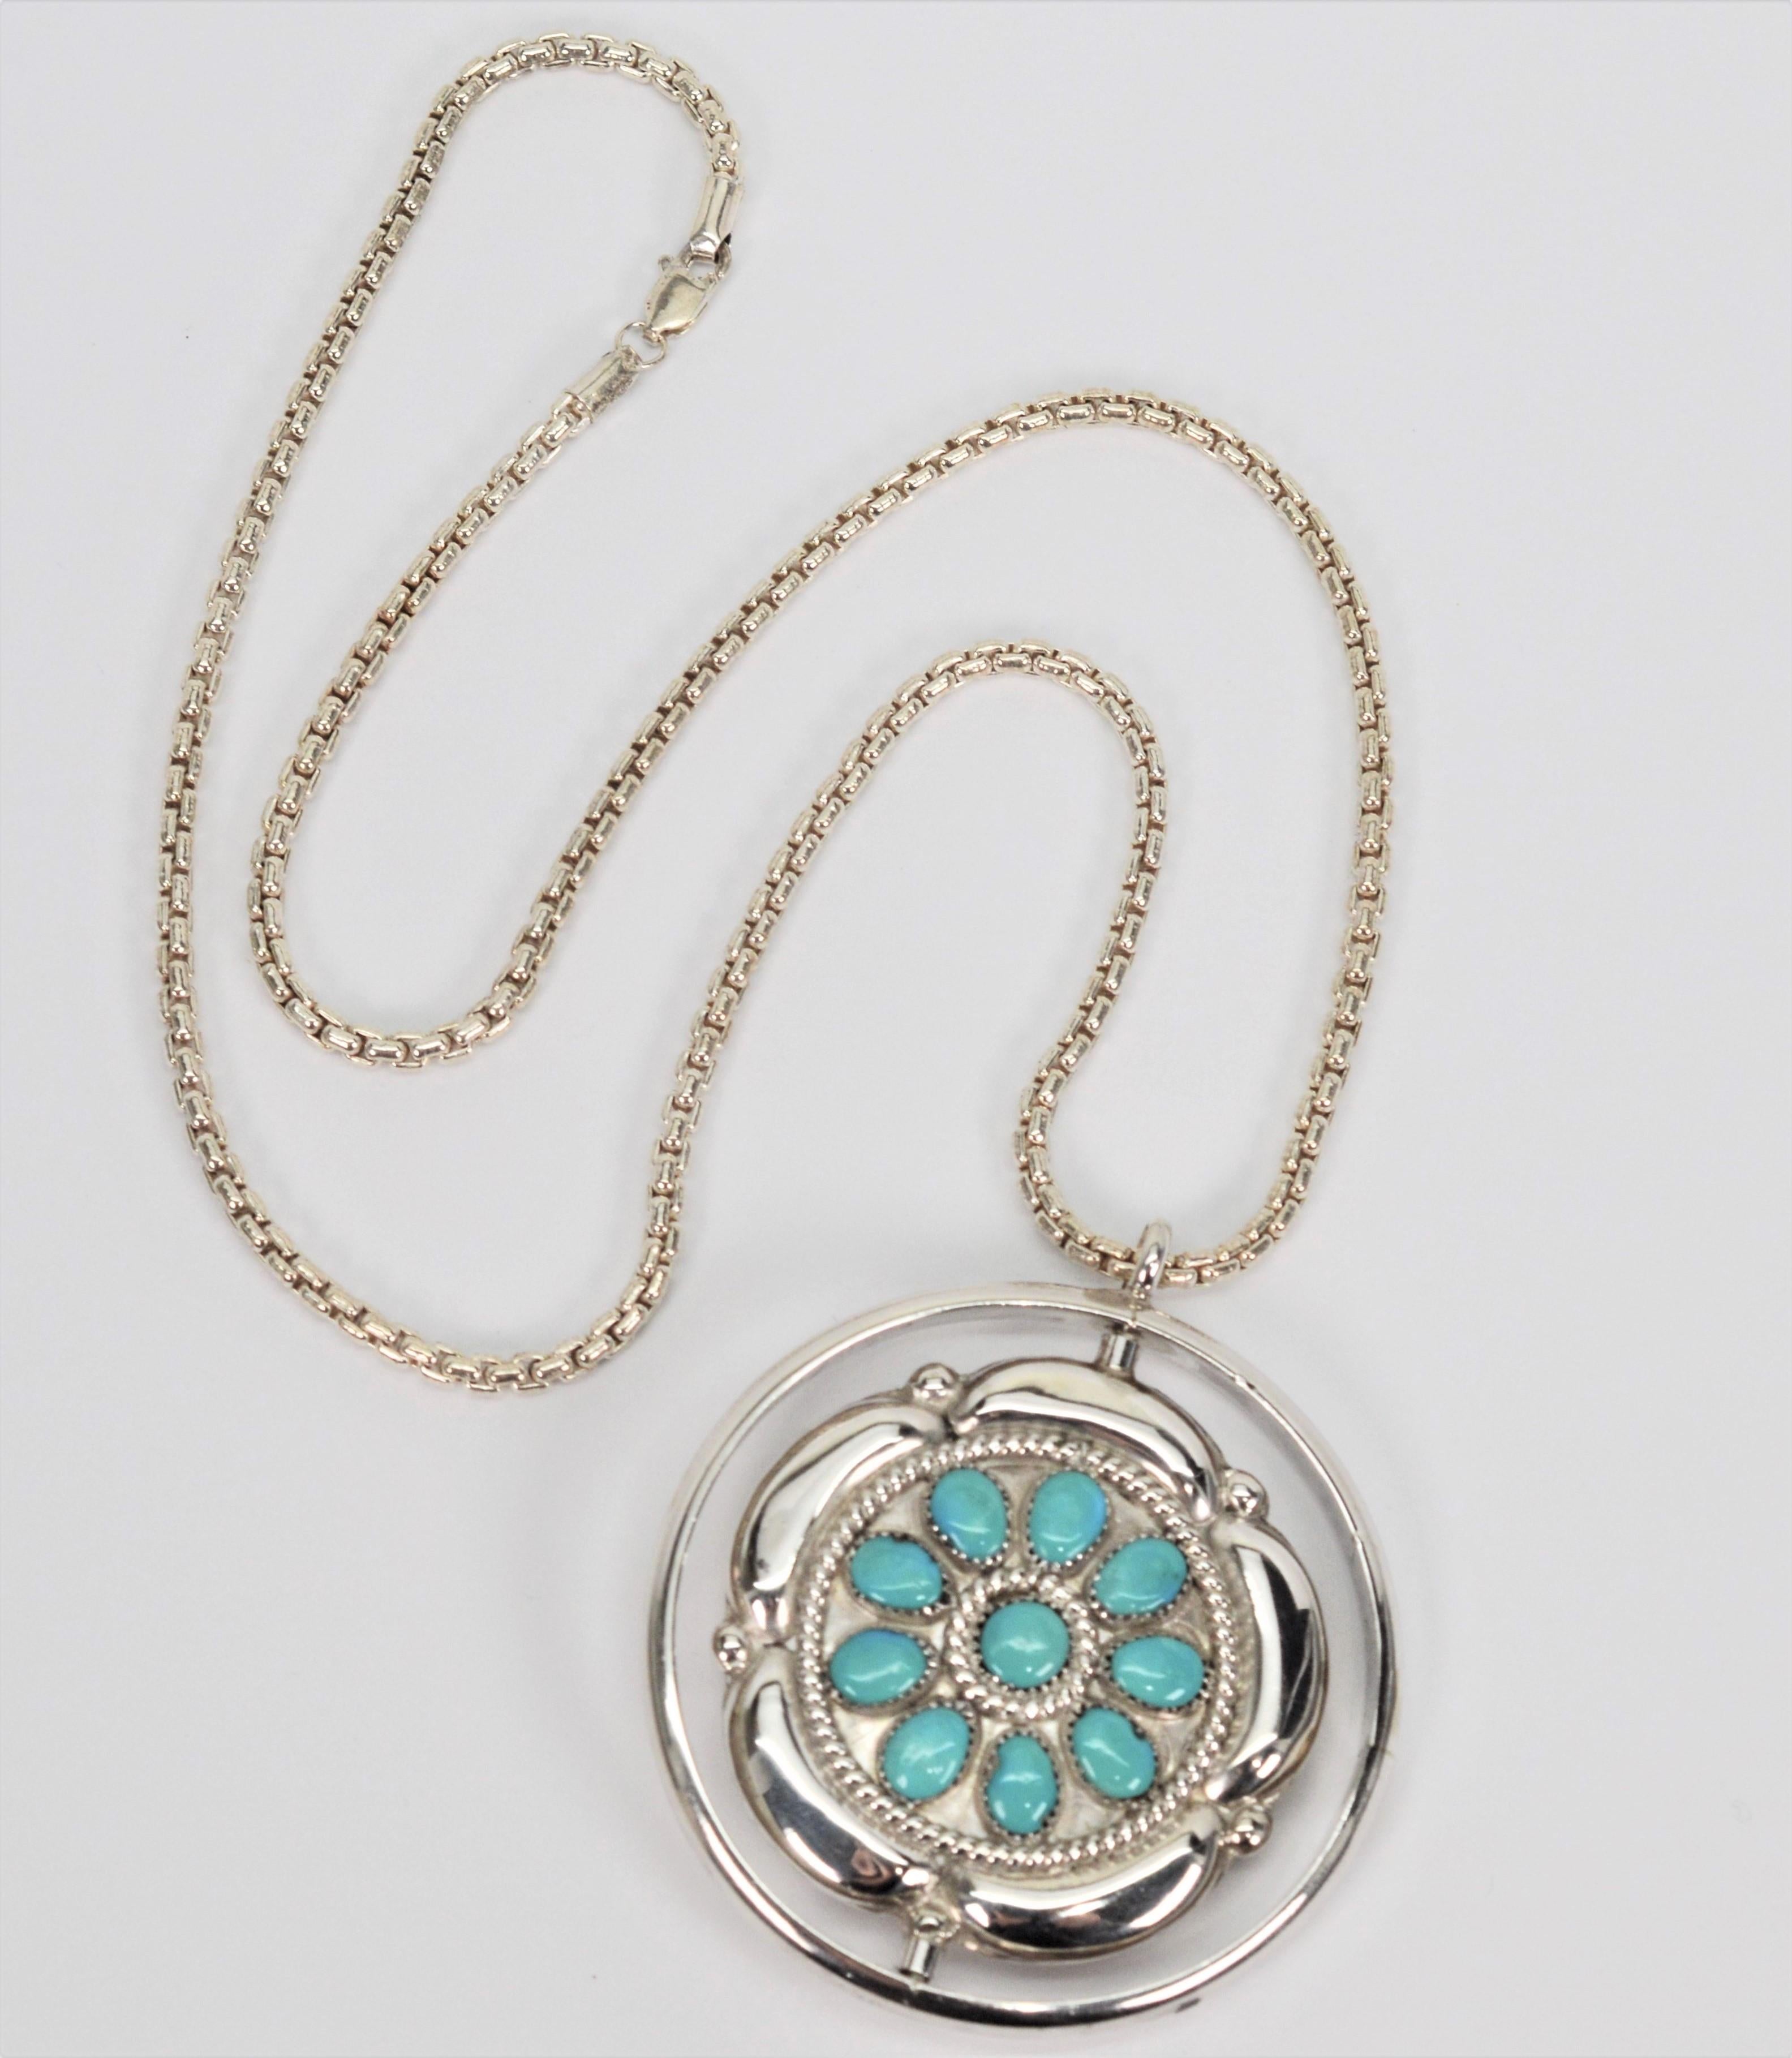 Vintage Zuni turquoise and coral flower silver spinner pendant crafted by known Zuni artisans Fred and Elsie Lonconsello. Southwest style colorful bursts have clusters of natural stone arranged in celestial inspired patterns. The spinner pendant